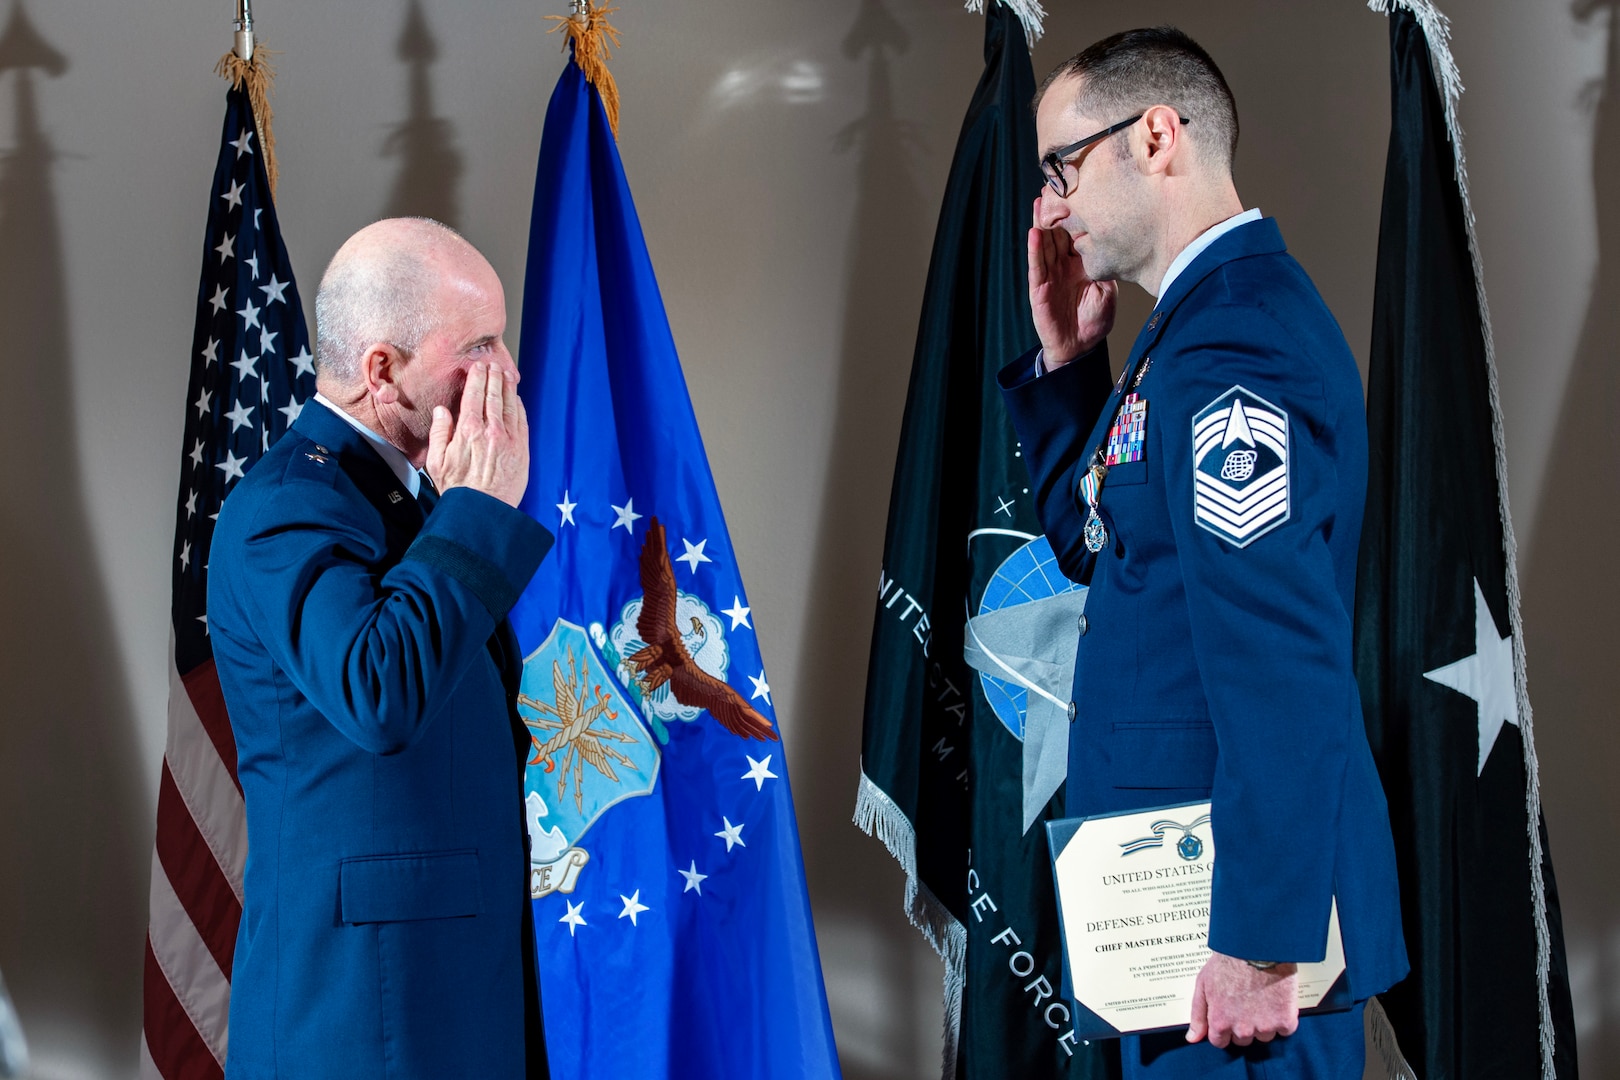 two service members salute each other